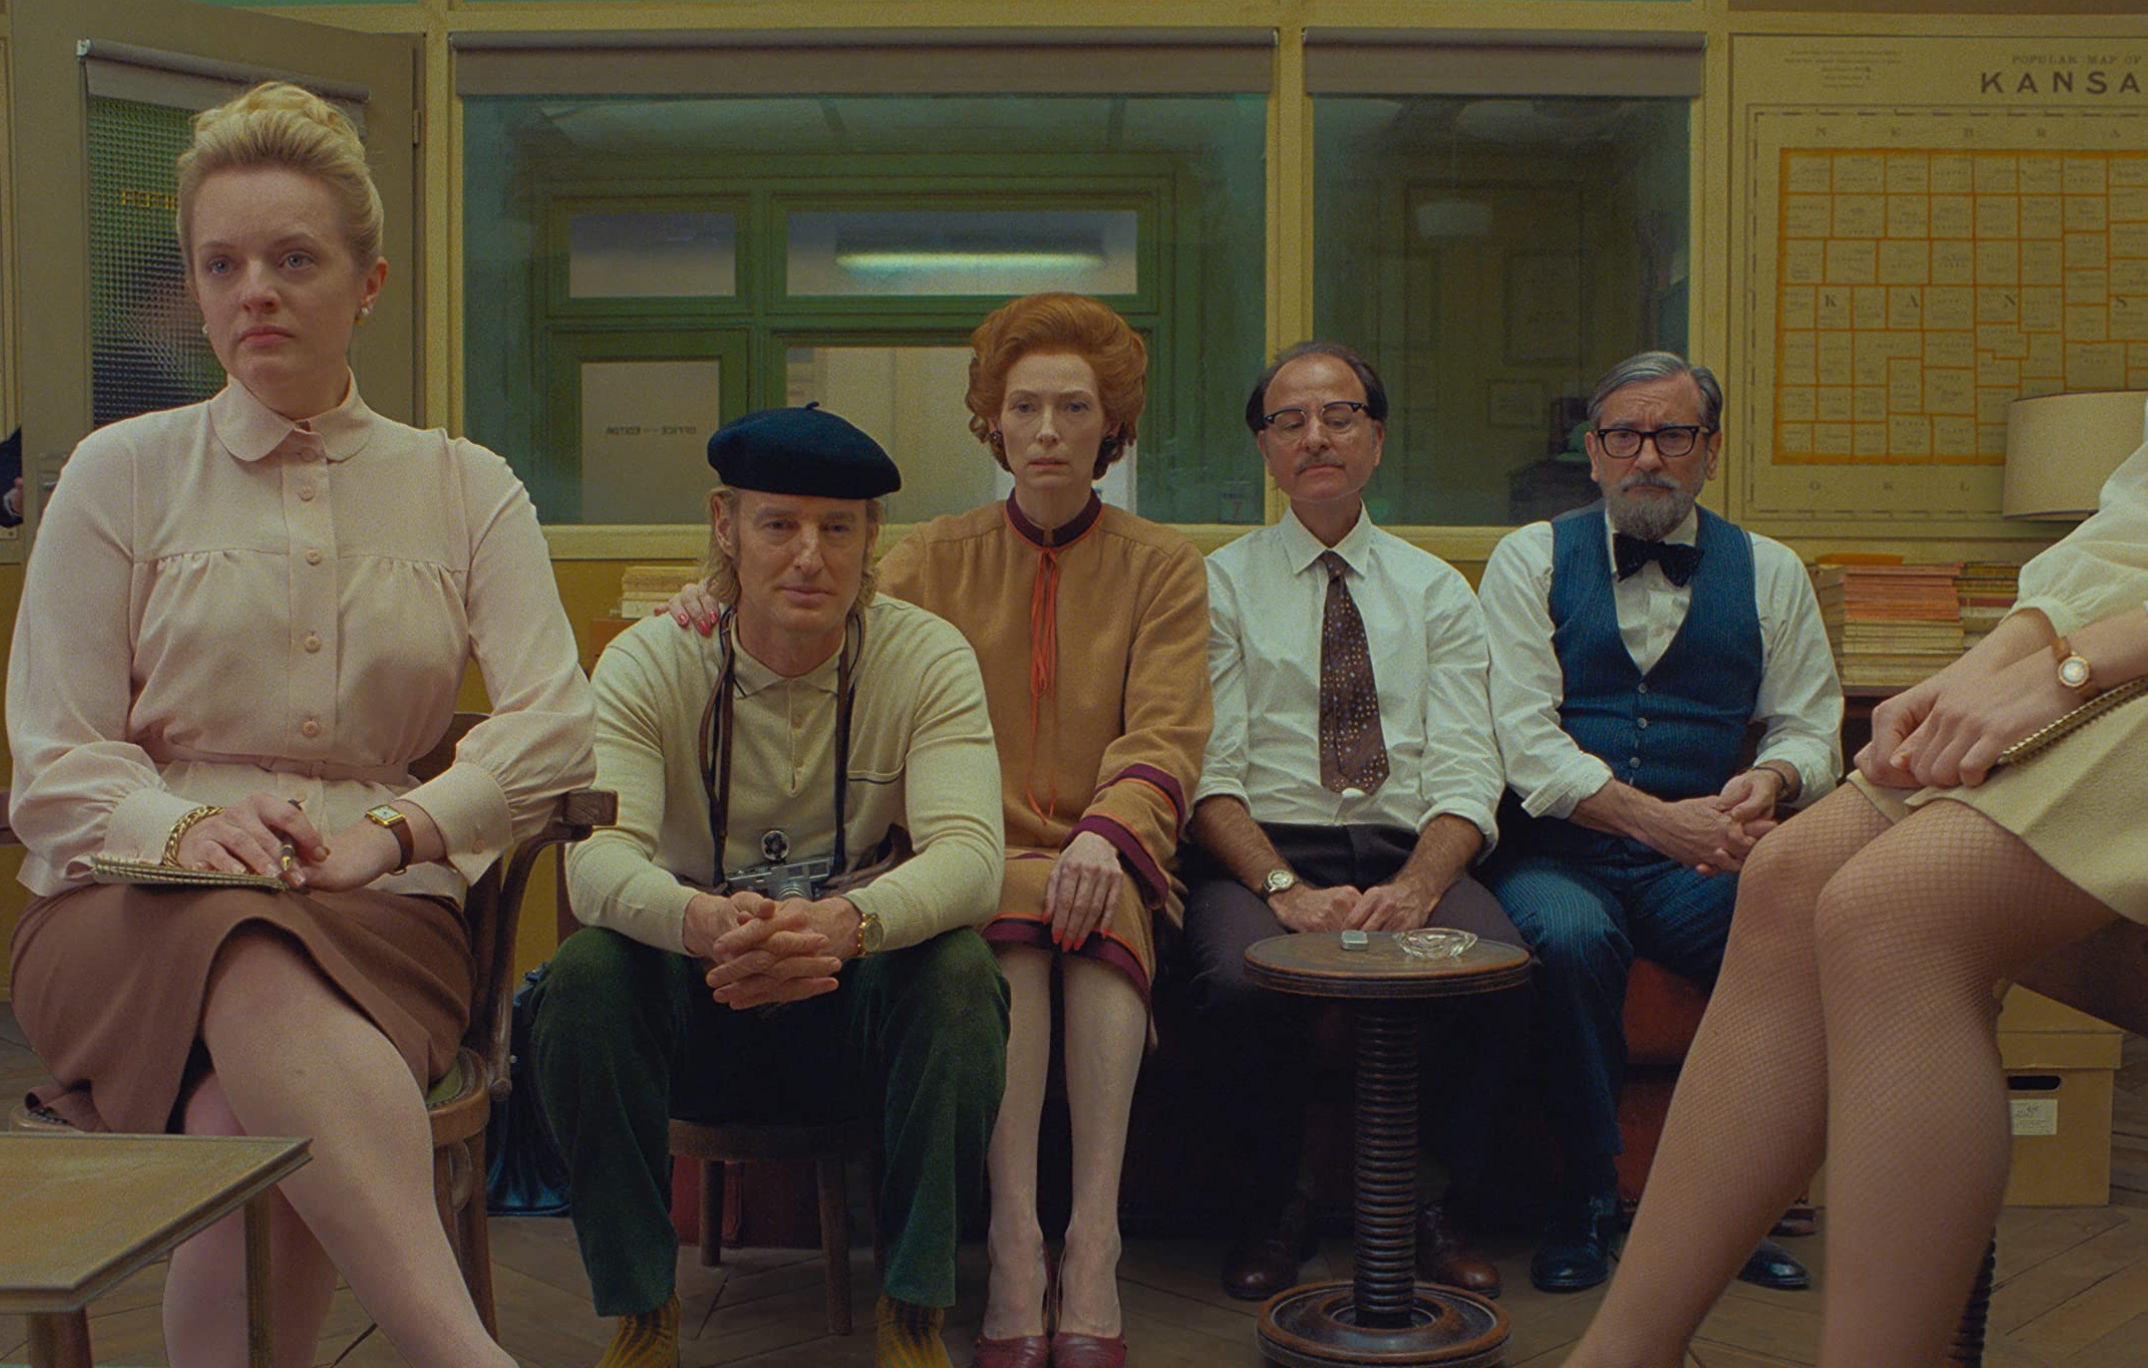 Outfits to Take On The Wes Anderson TikTok Trend